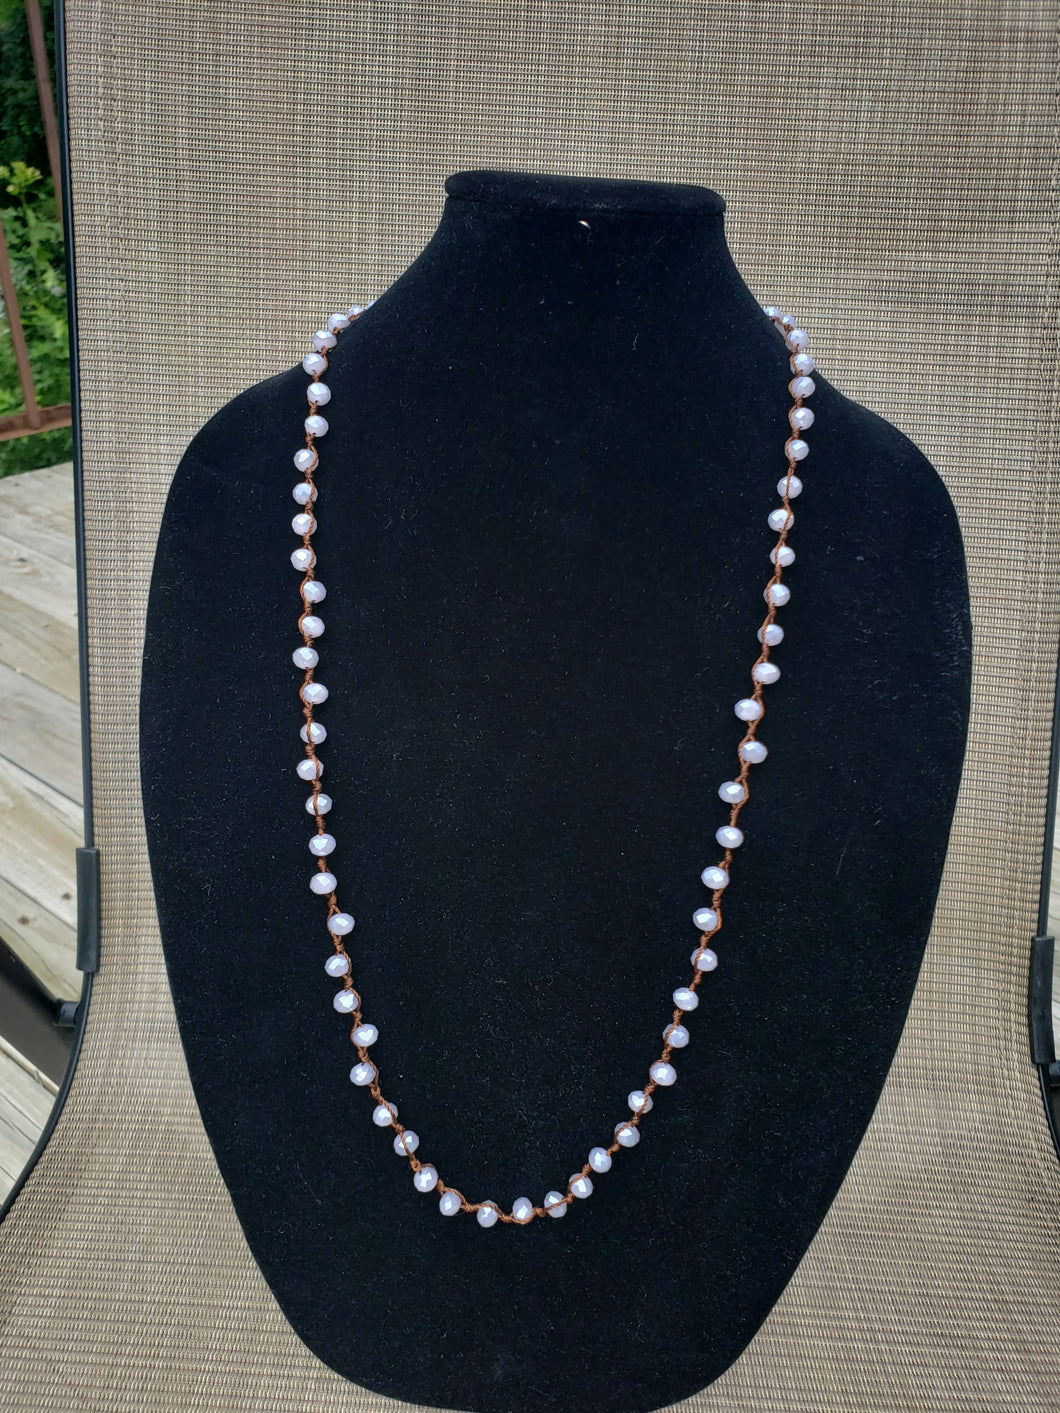 Lilac Opaque Knotted Necklace-N8-36-0009